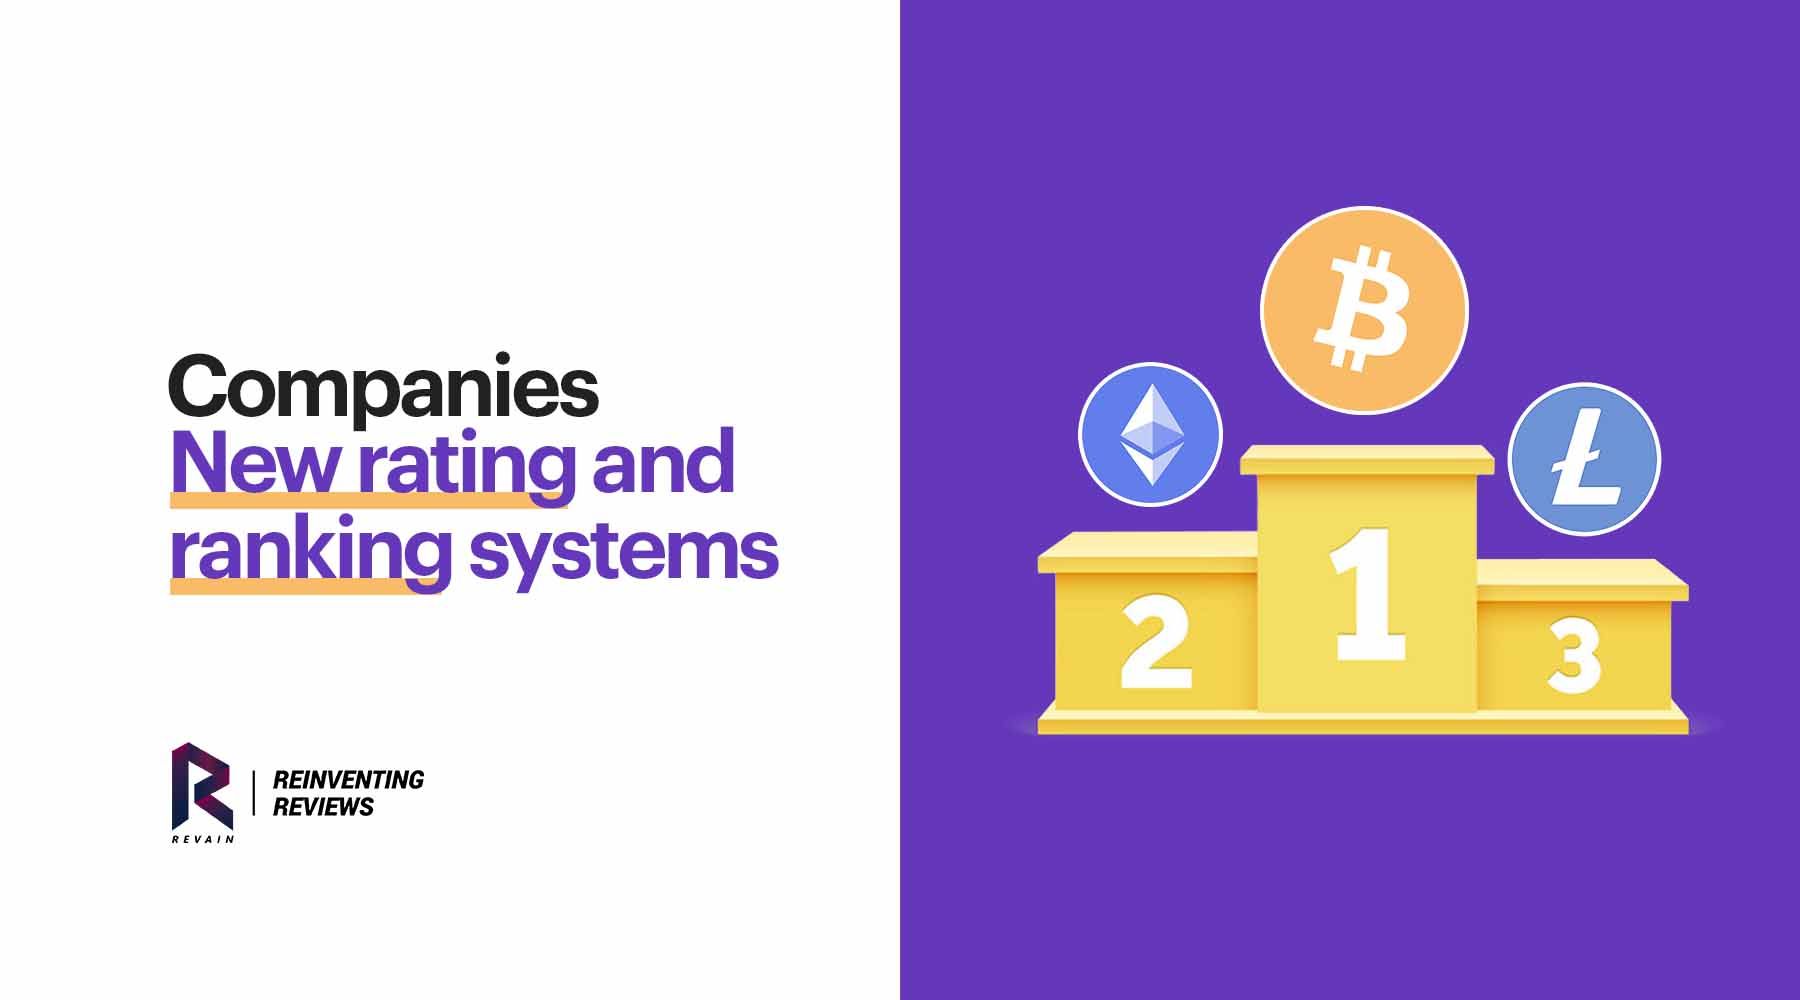 Revain updates companies rating and ranking systems